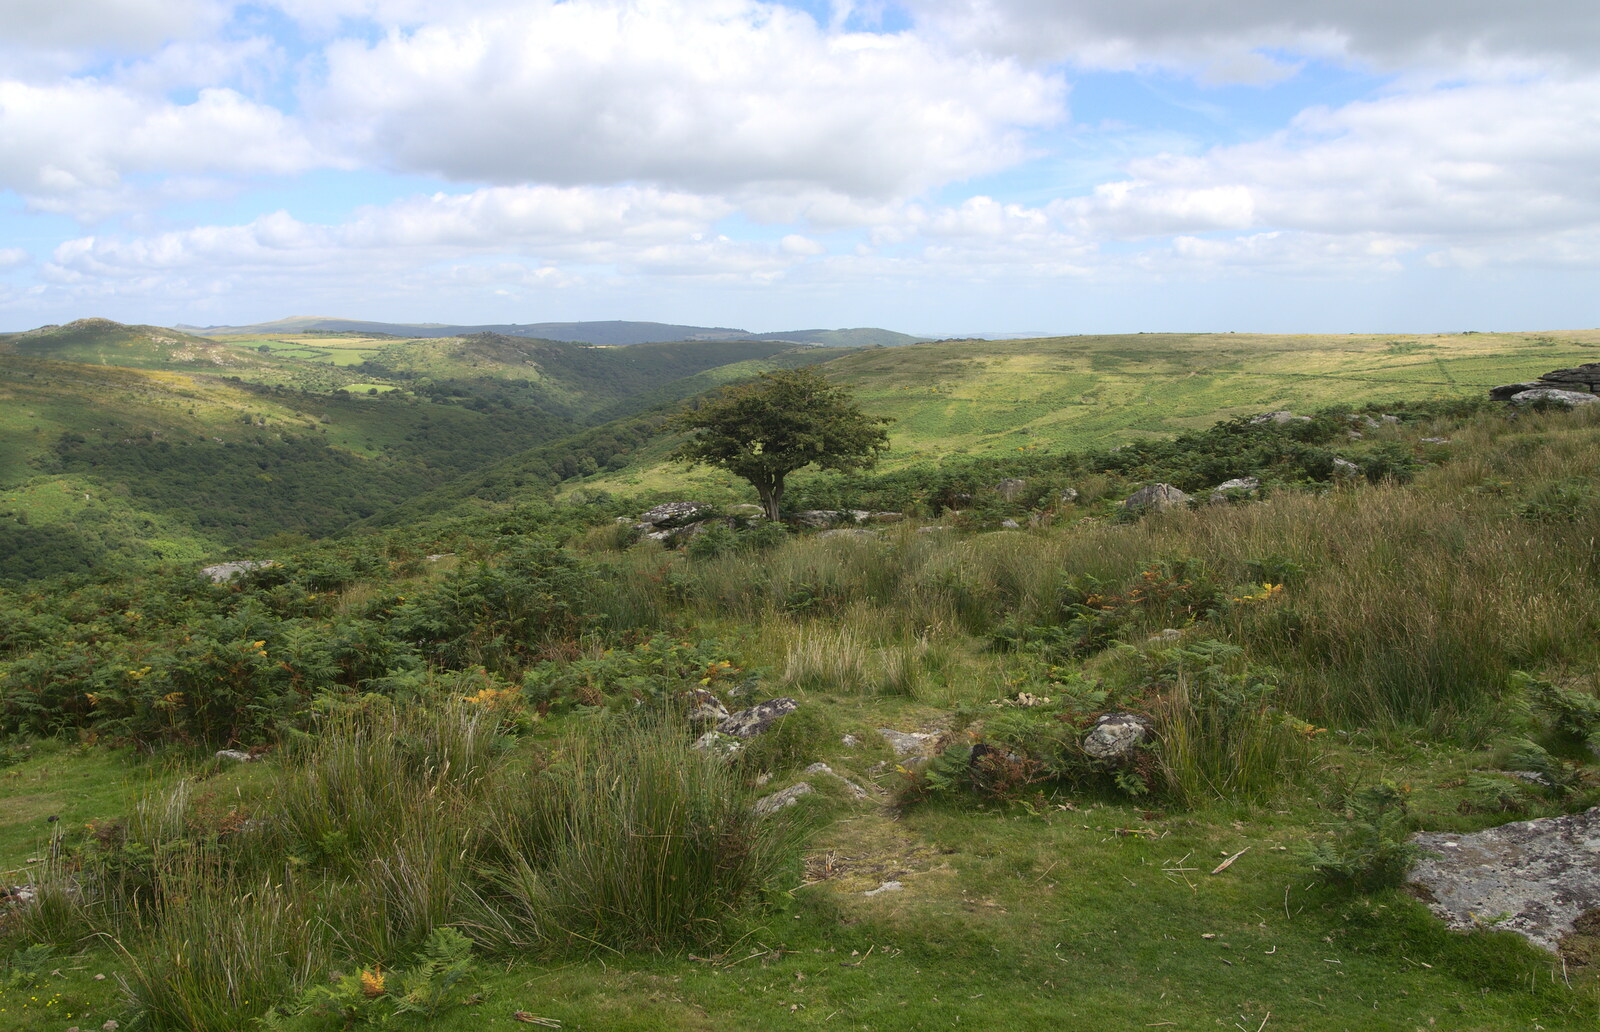 Solitary tree from Badger's Holt and Bronze-Age Grimspound, Dartmoor, Devon - 10th August 2016